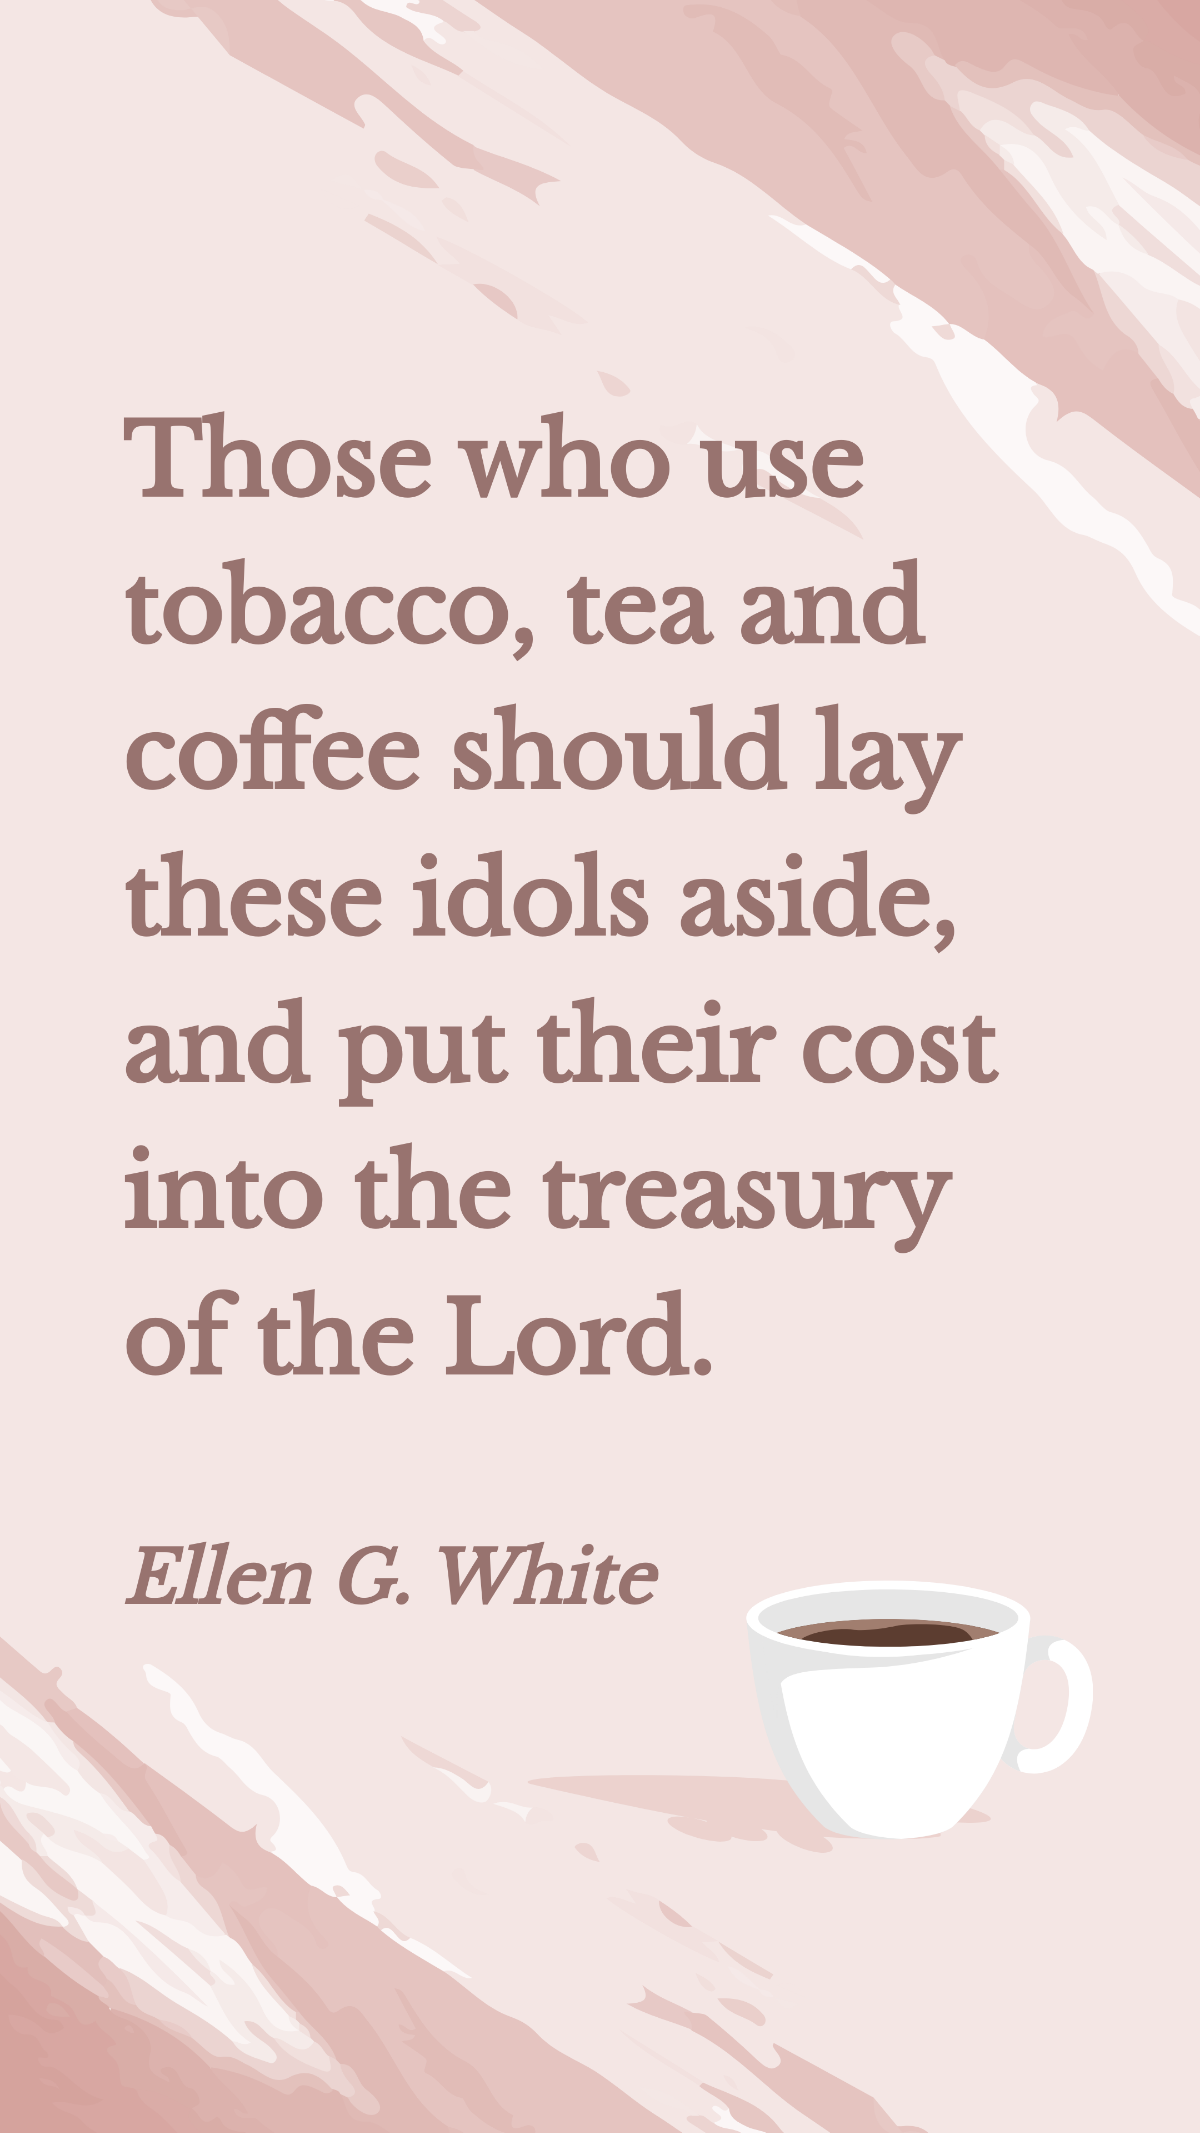 Ellen G. White - Those who use tobacco, tea and coffee should lay these idols aside, and put their cost into the treasury of the Lord.